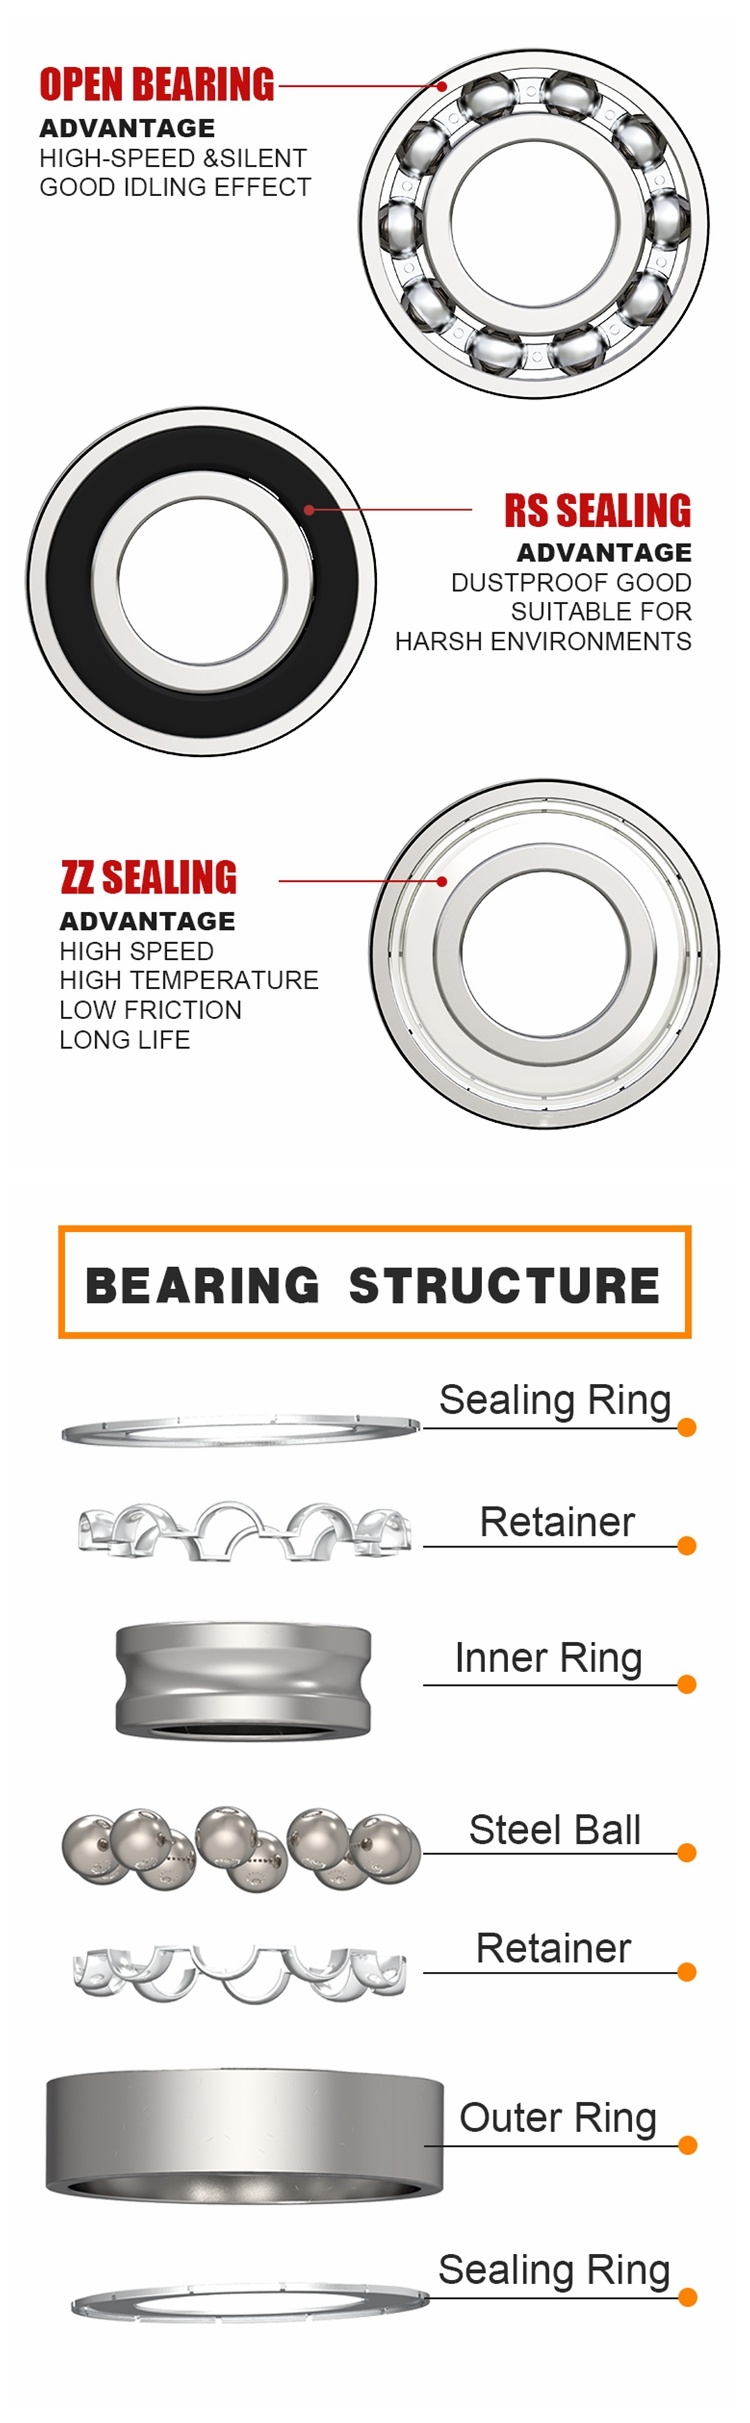 ABEC-3 Motorcycle Bearing Steel Cover 6816 Zz Ball Bearings